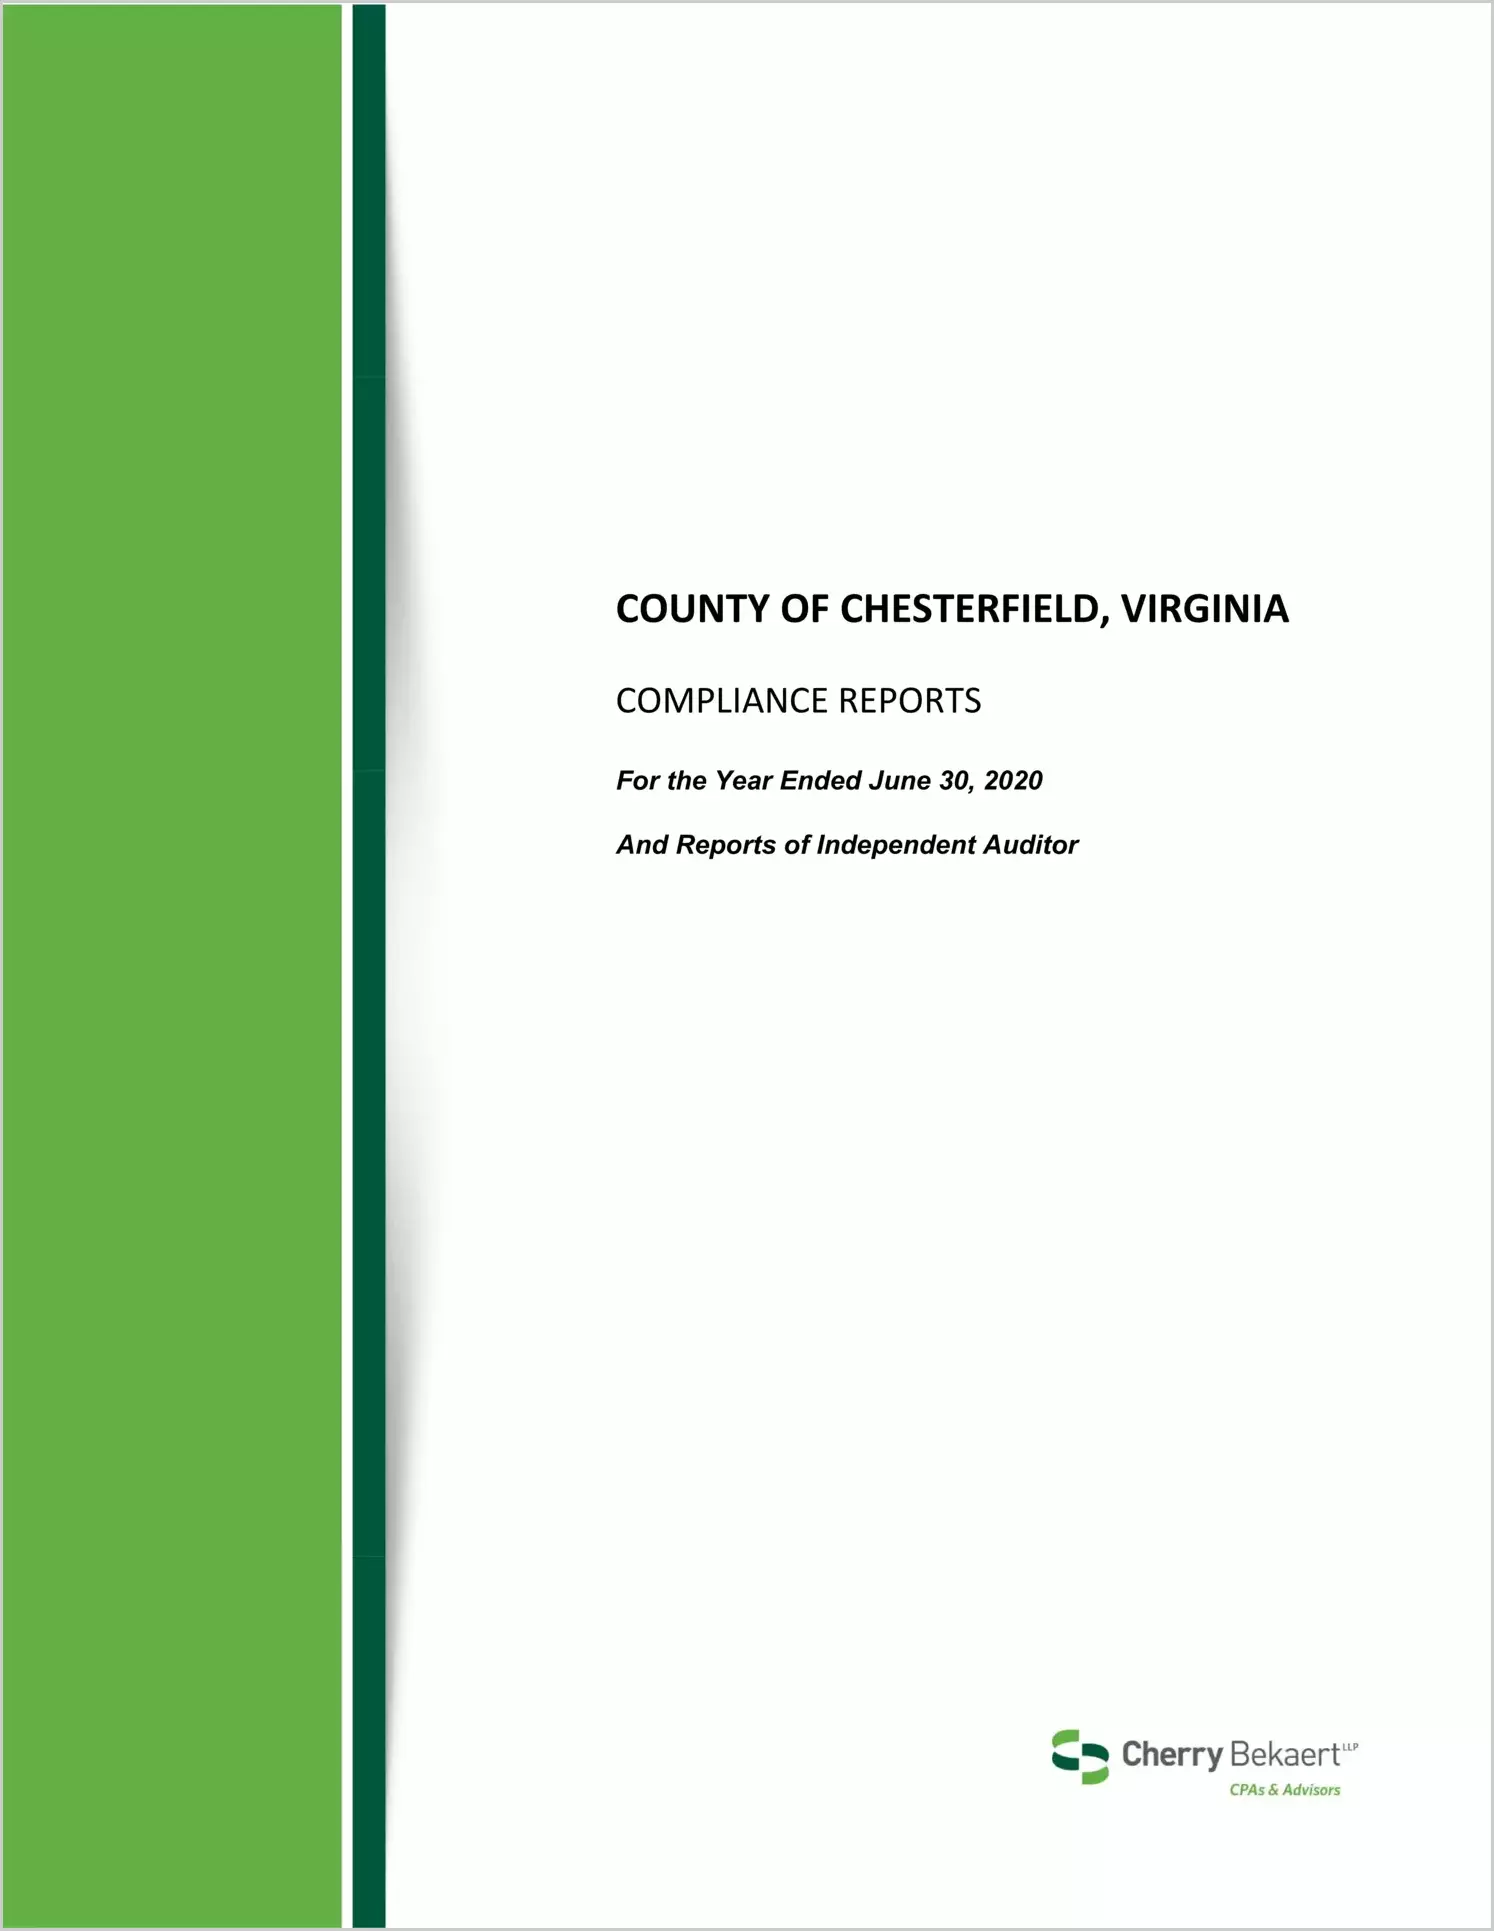 2020 Internal Control and Compliance Report for County of Chesterfield